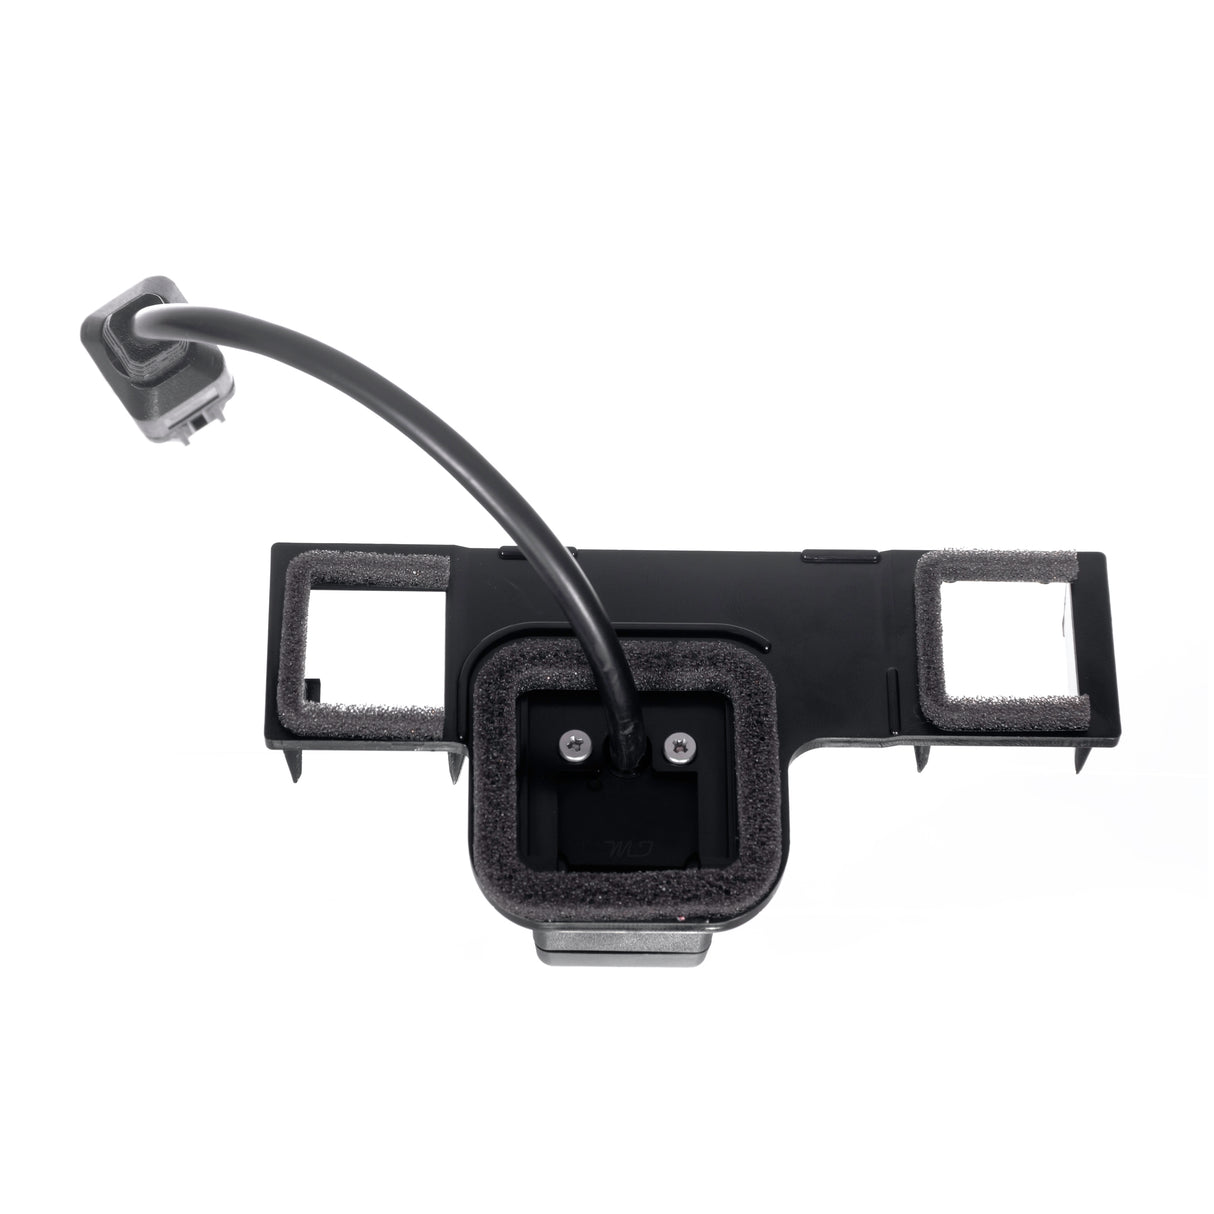 Toyota Sienna w/o Harness (2011-2015) OEM Replacement Backup Camera OE Part # 86790-08020